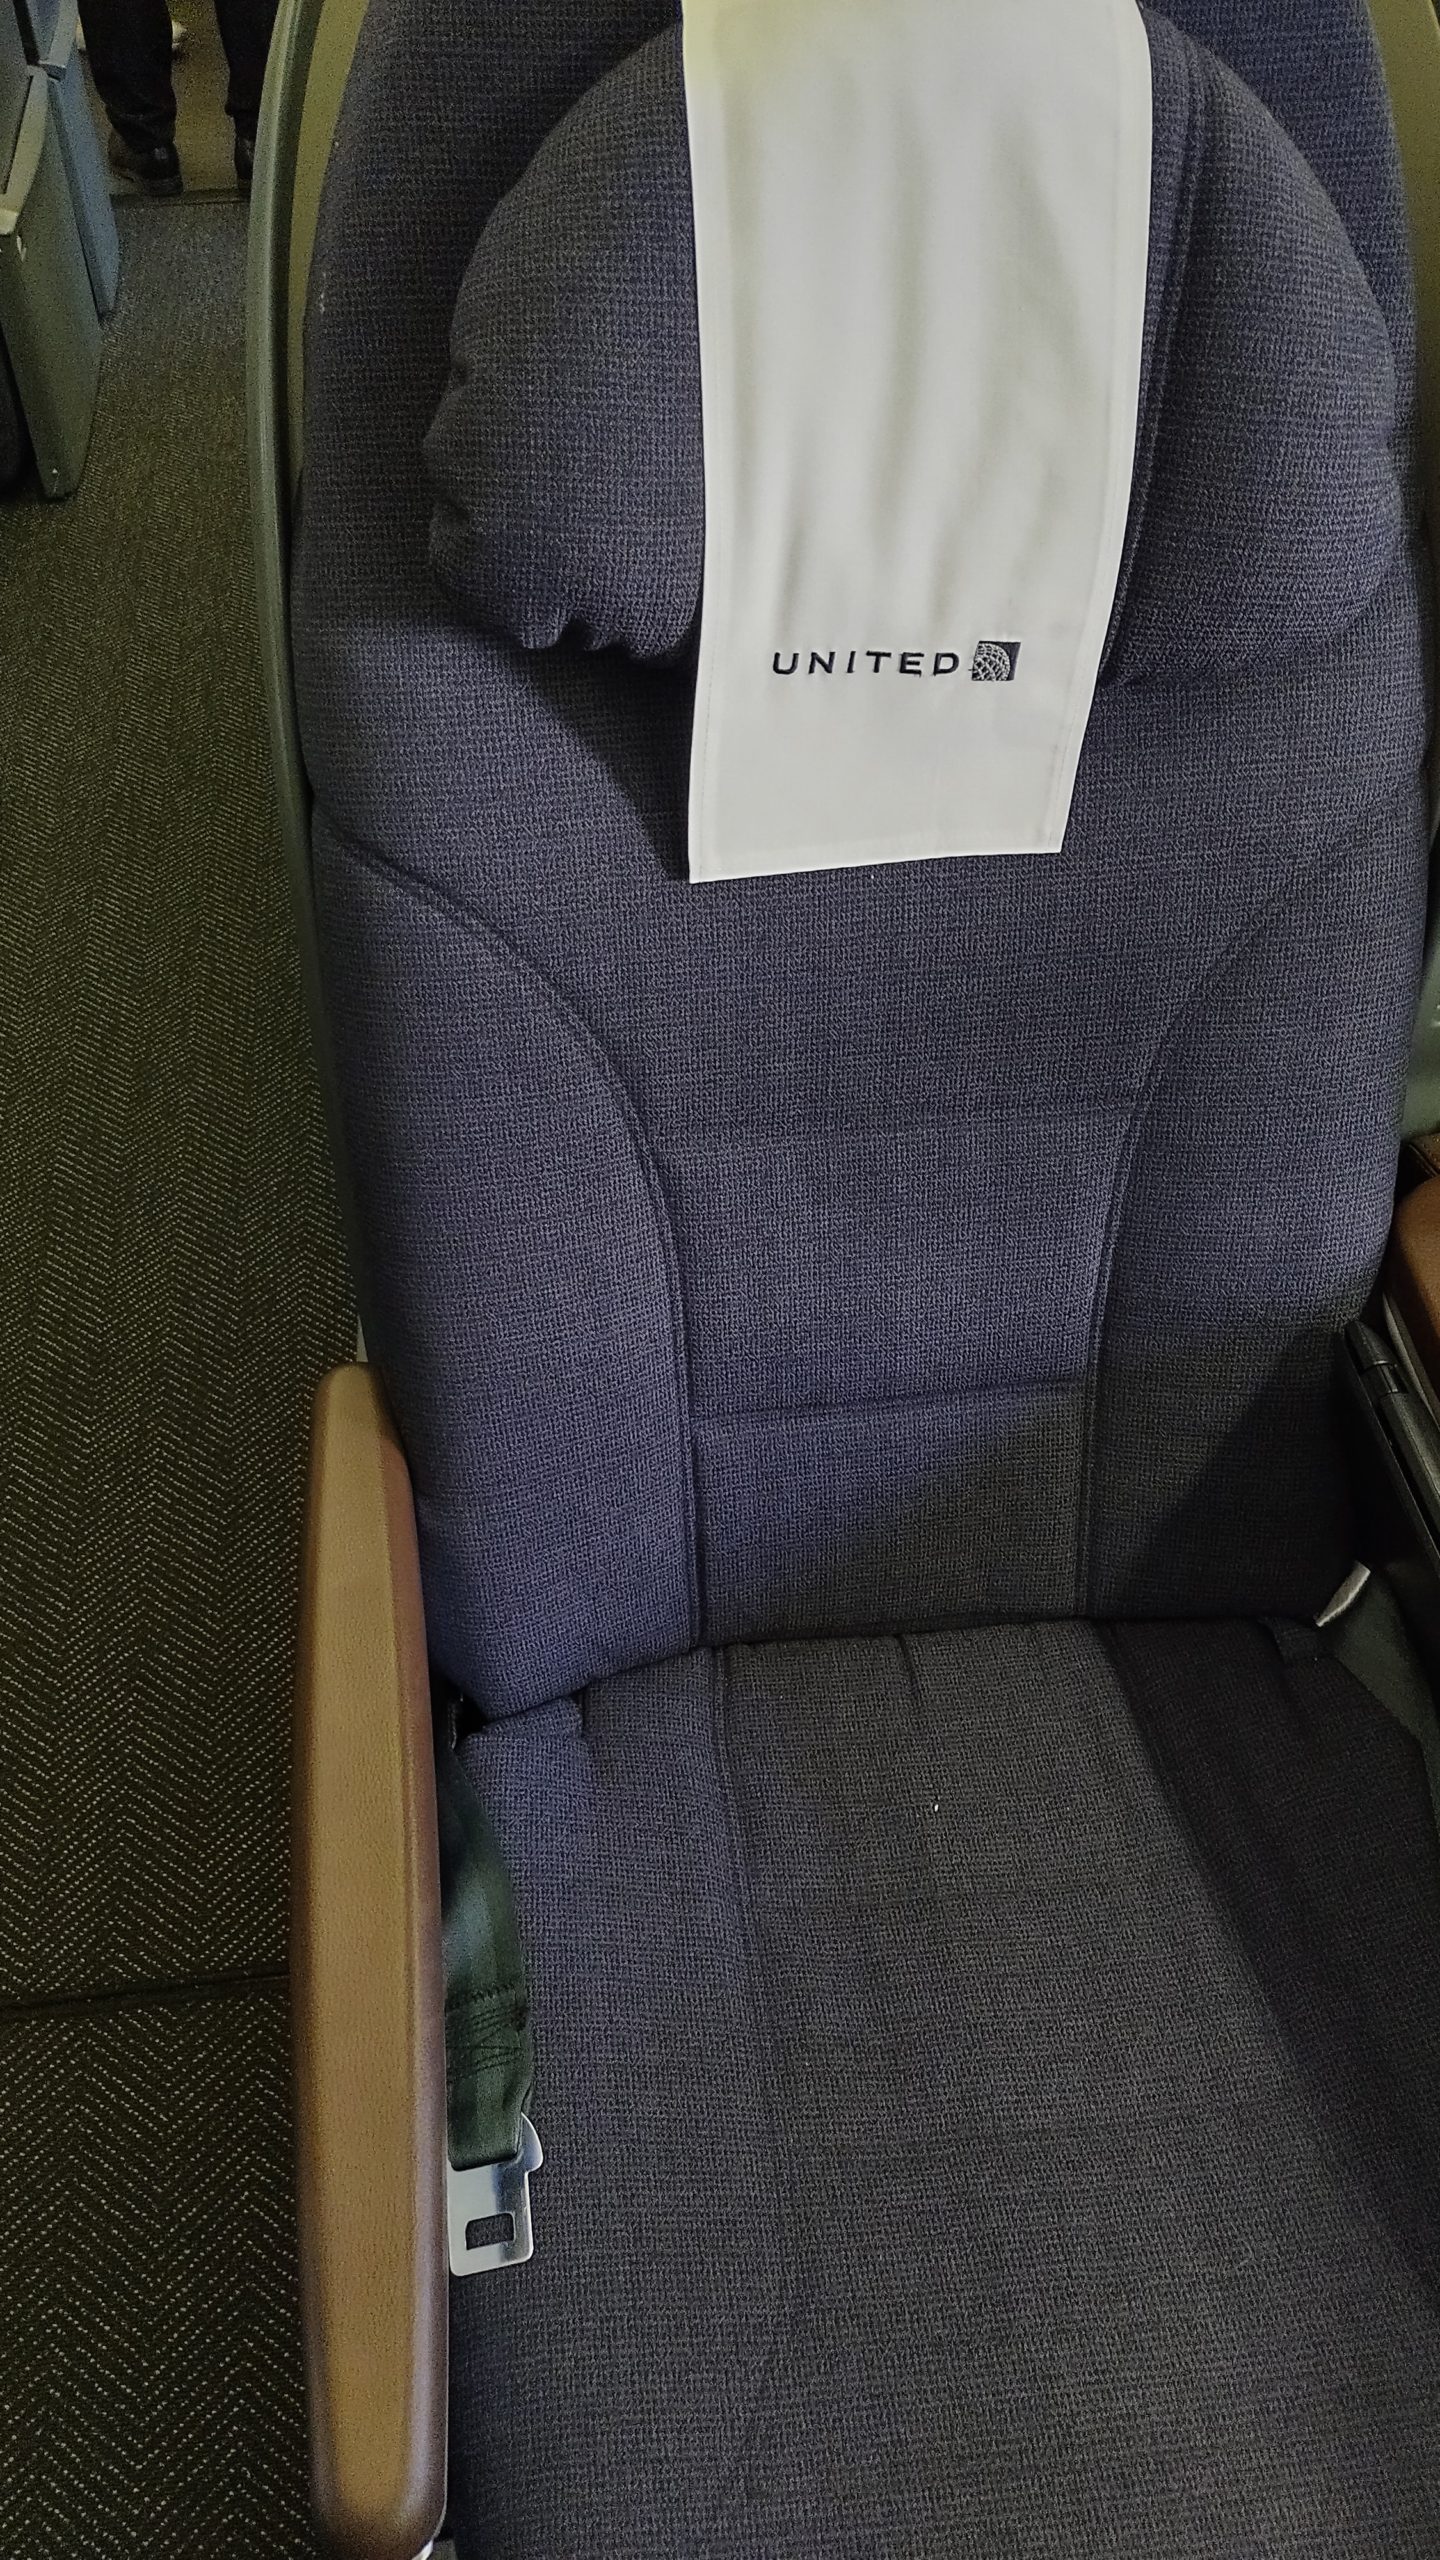 PICTURE OF MY SEAT.